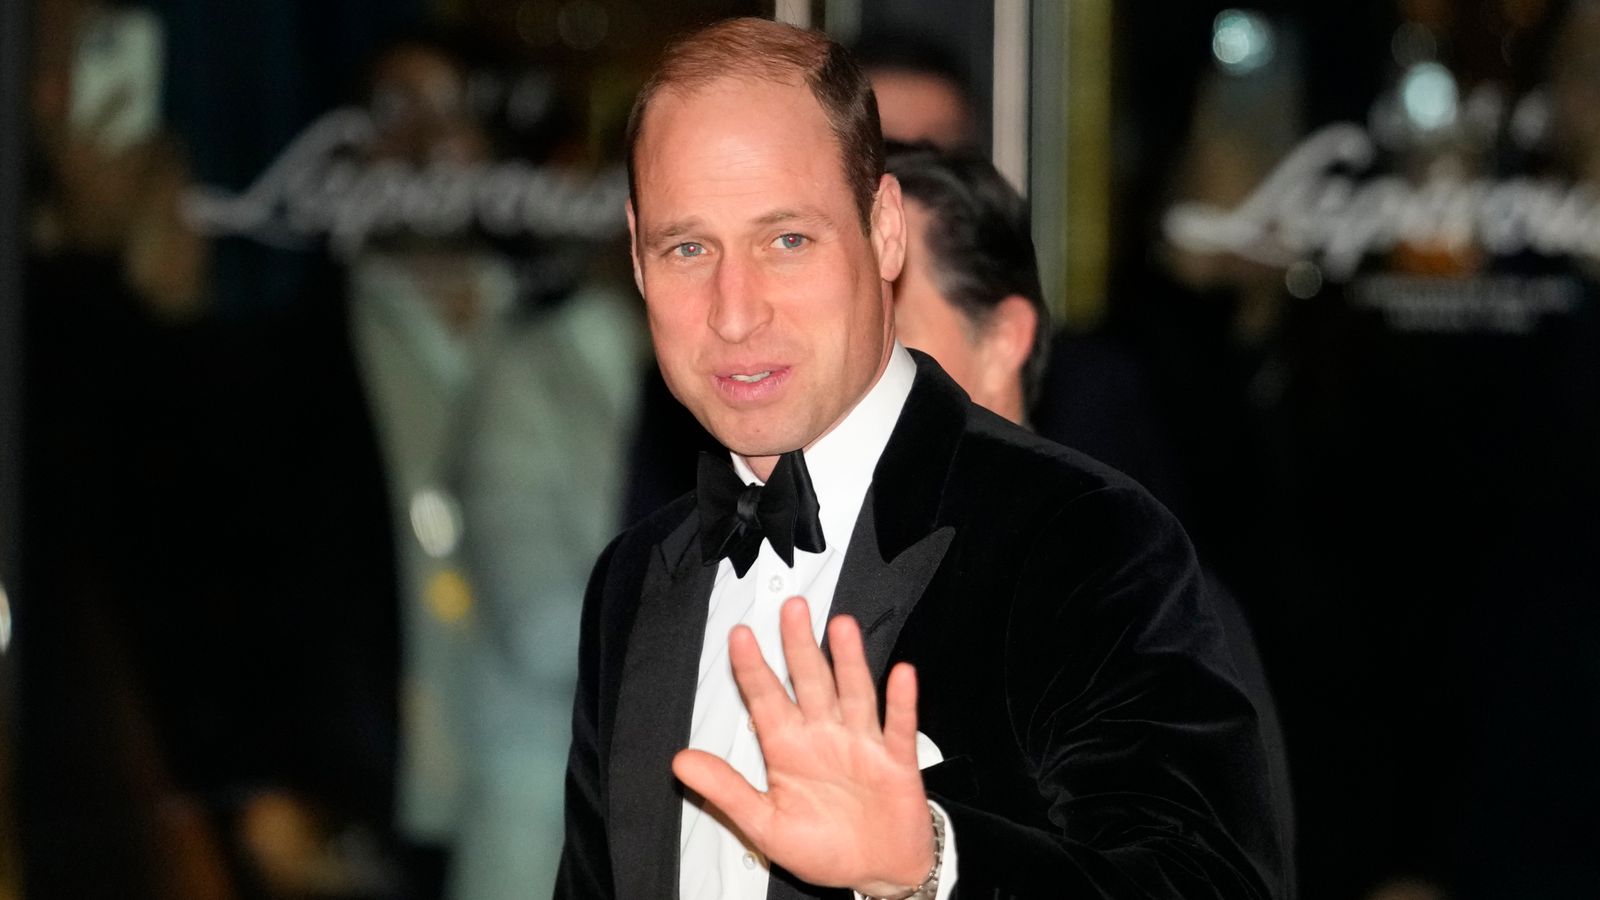 Prince William to highlight plight of those affected in Middle East conflict